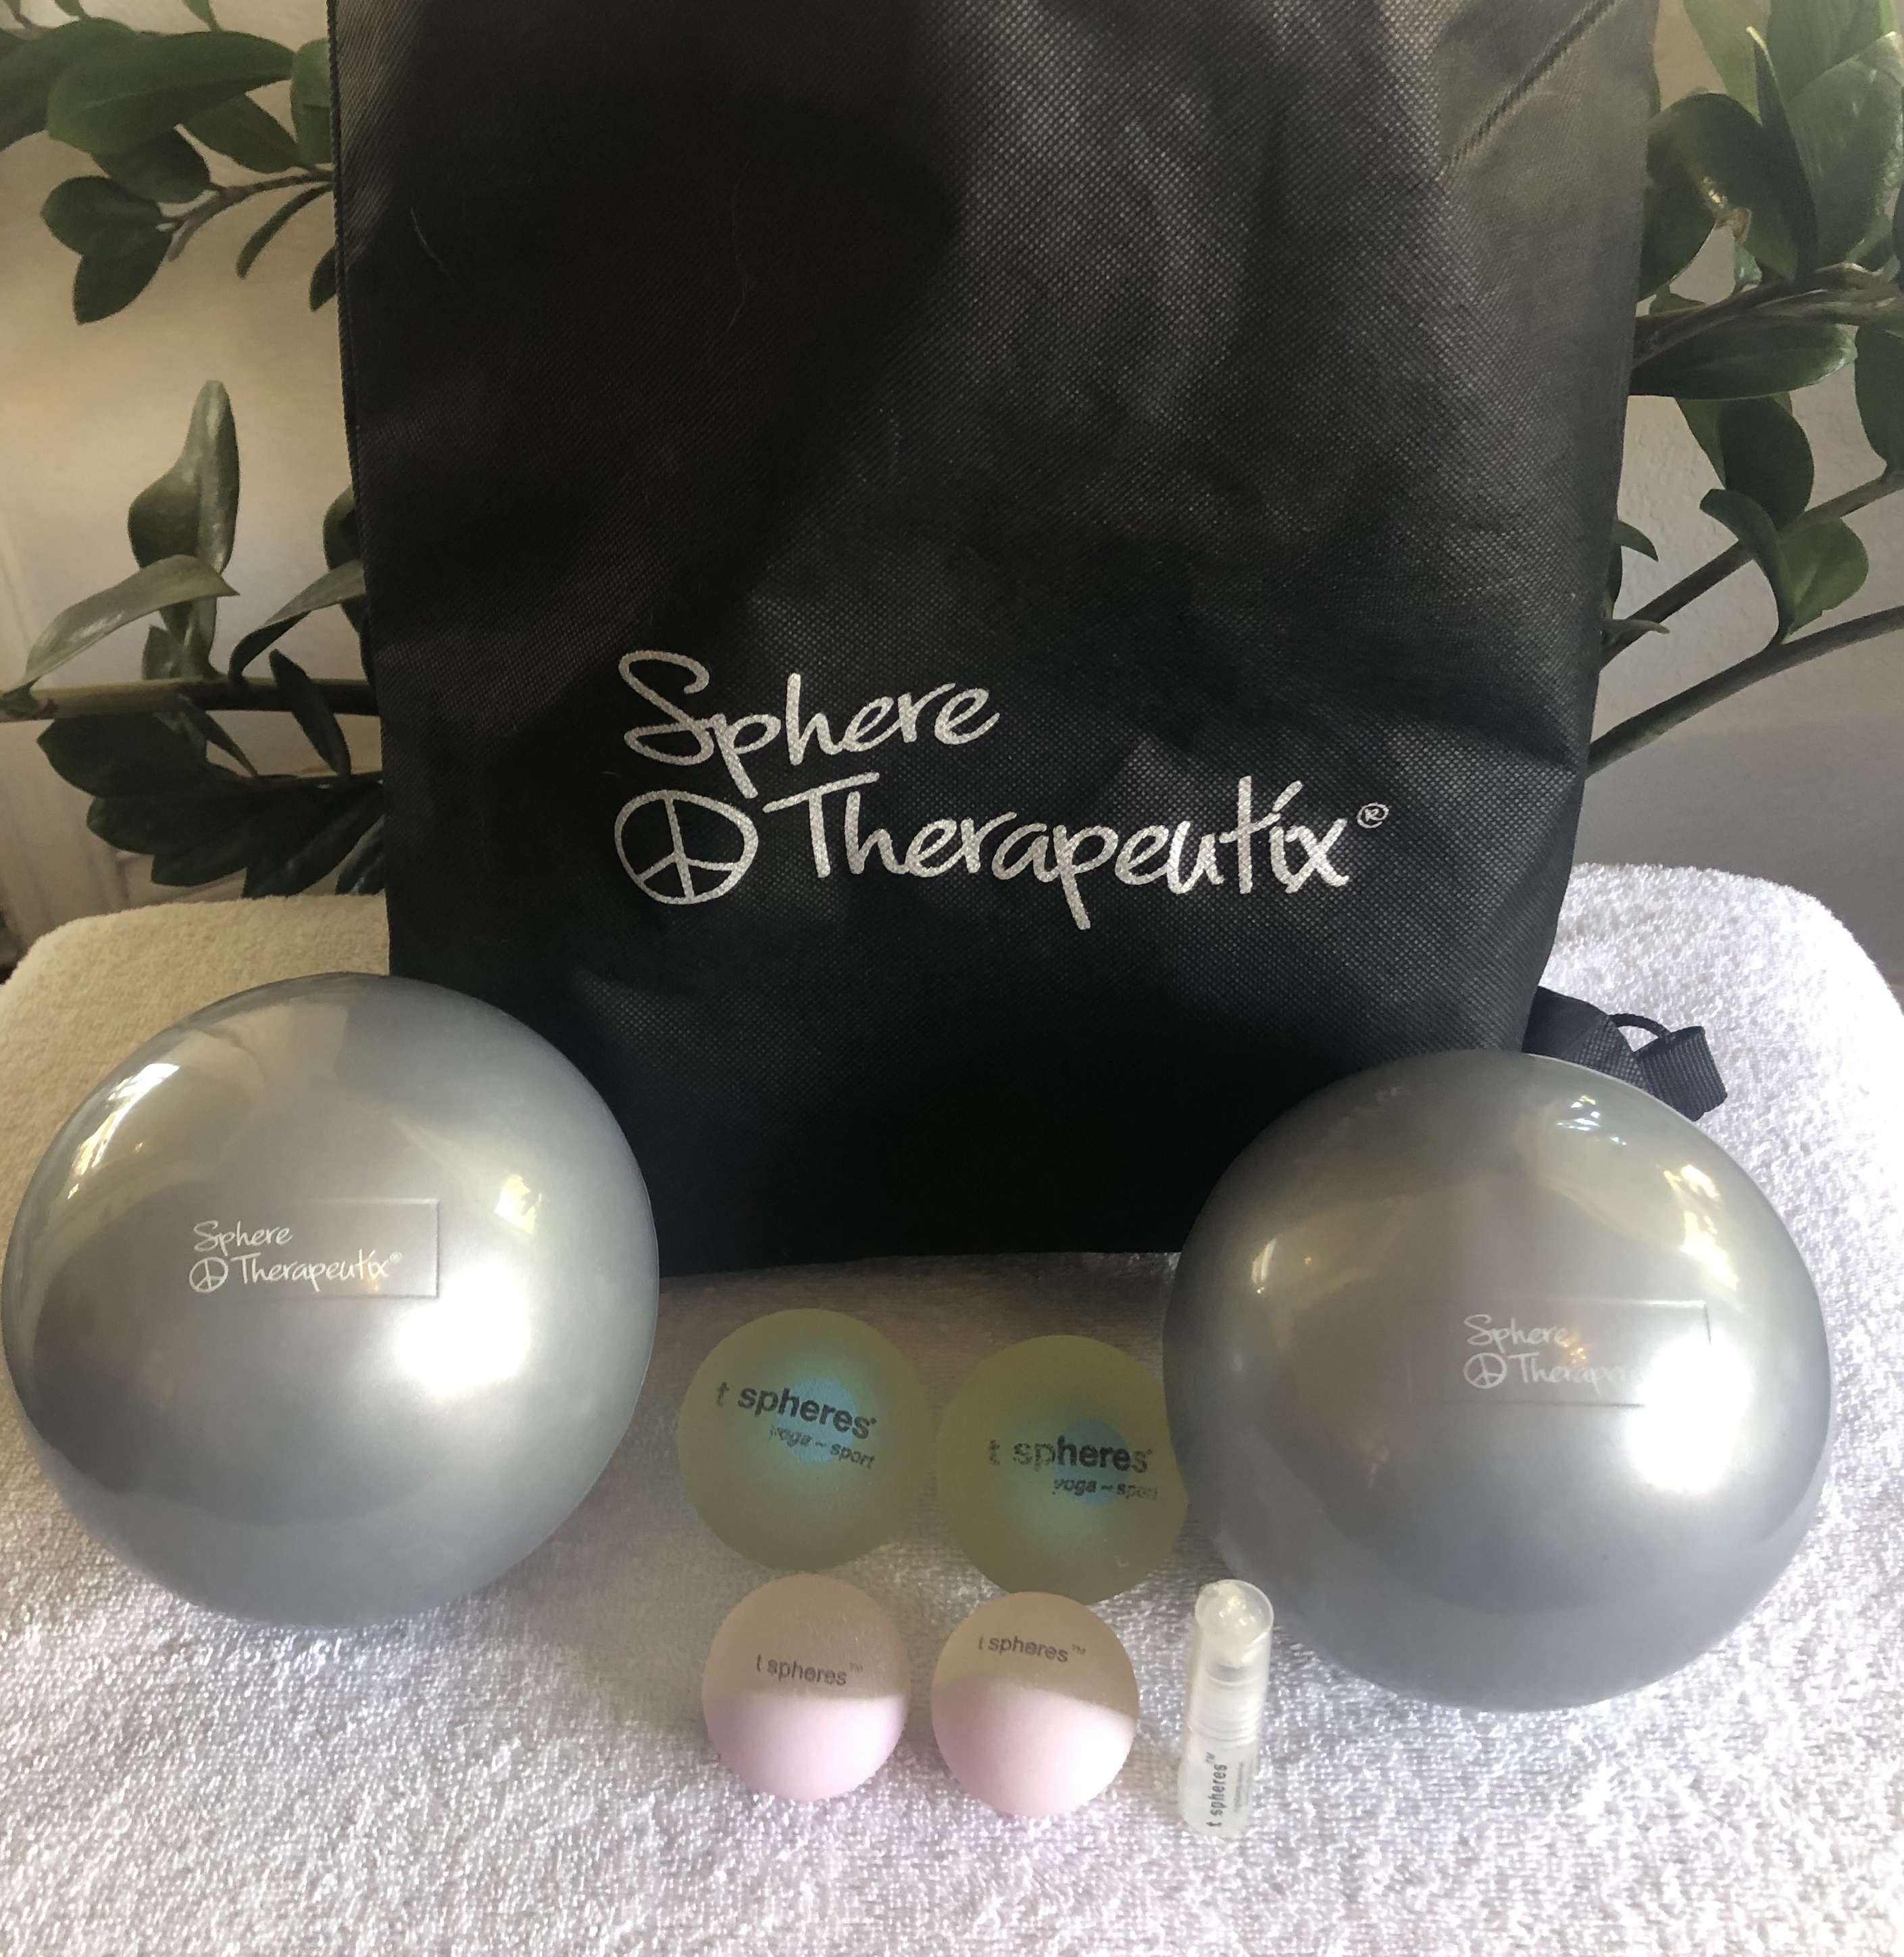 Sphere Therapeutix® Ultimate Ball Roller Kit